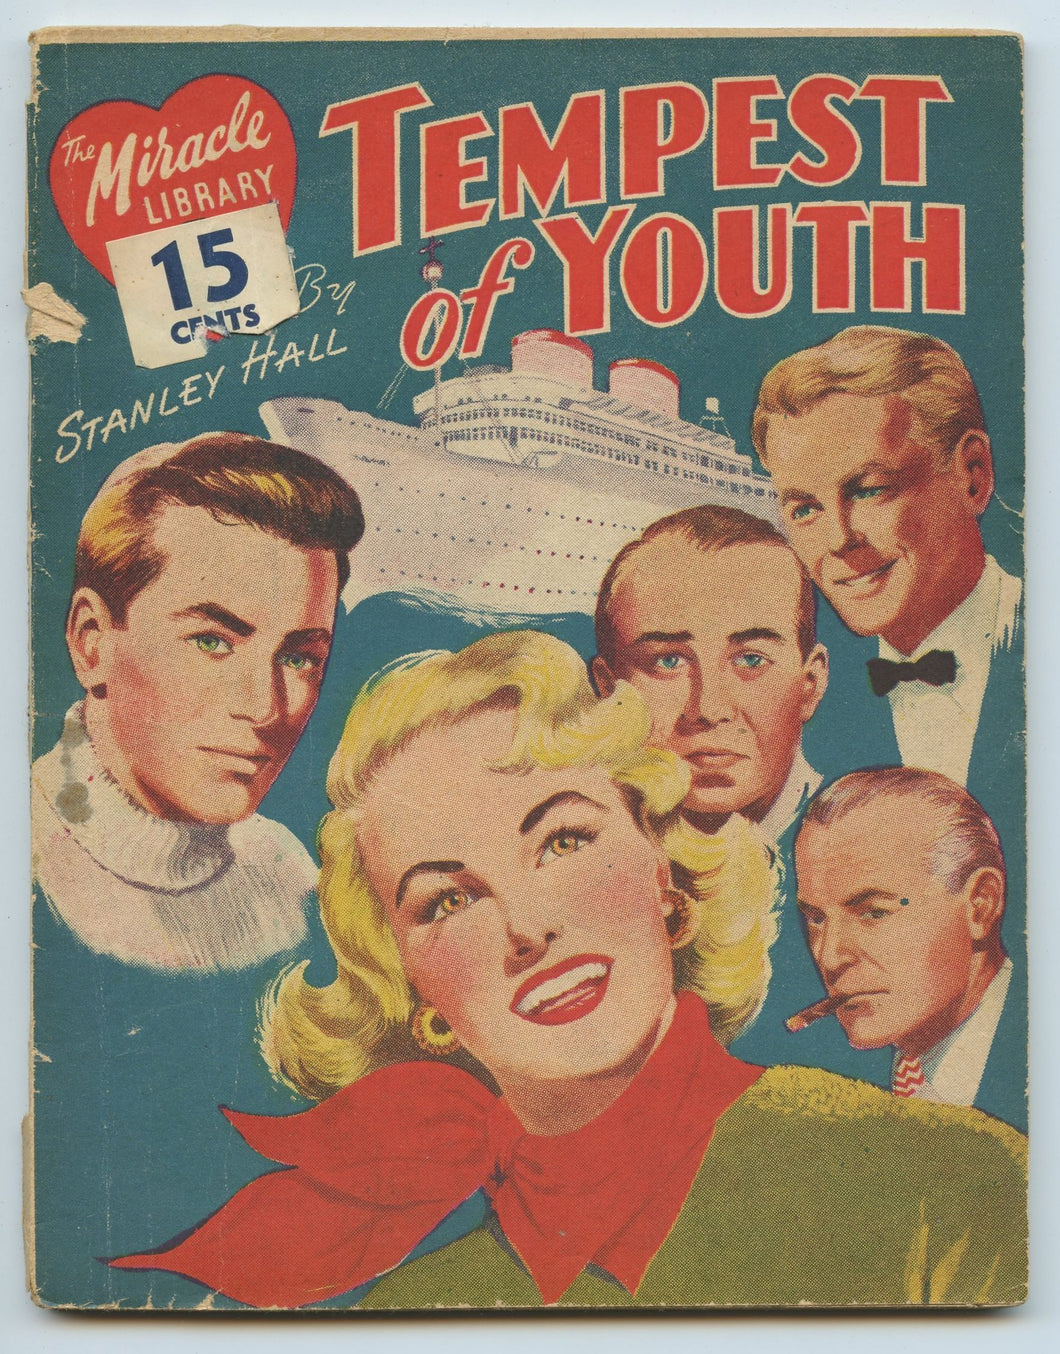 Tempest of Youth